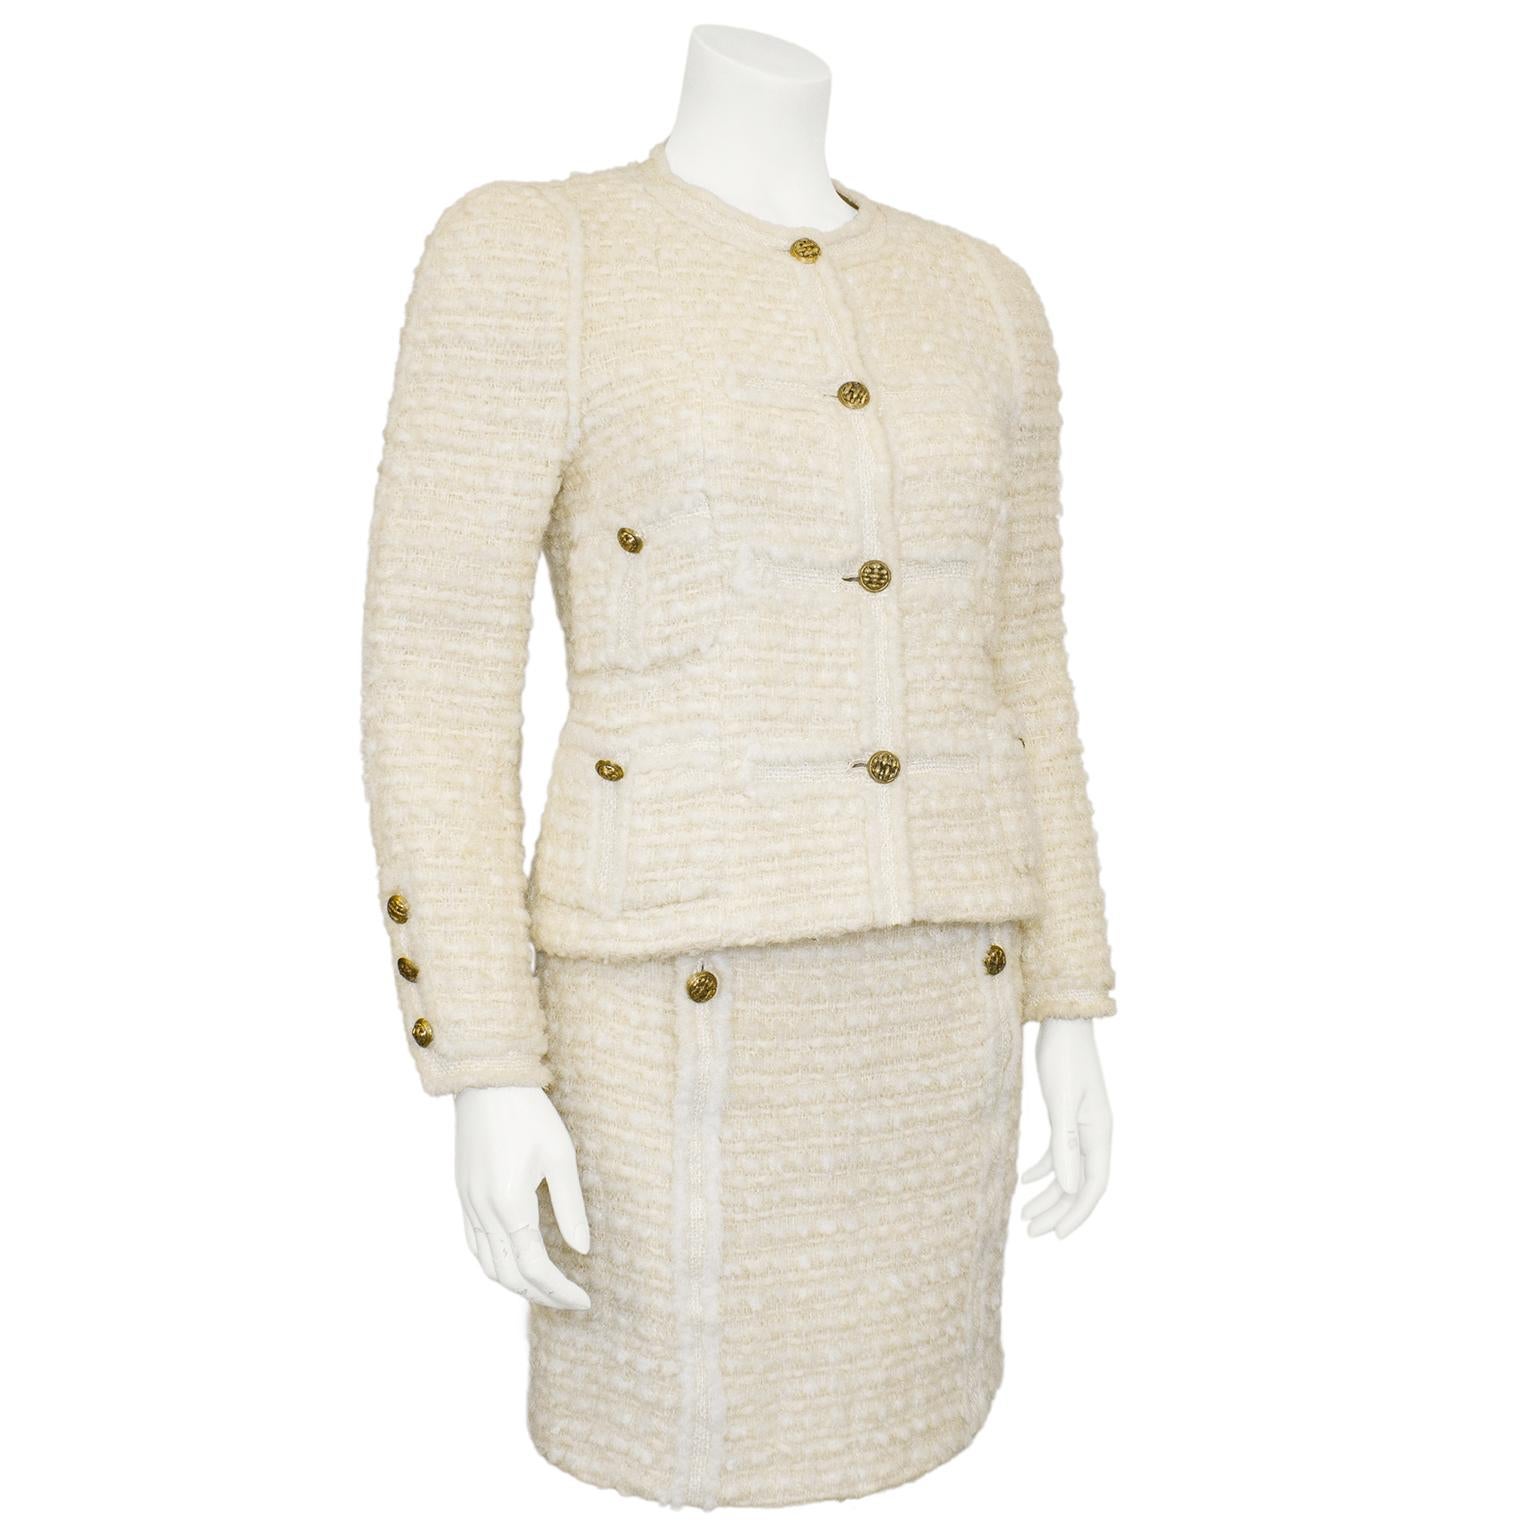 Absolutely stunning and classic 1980's Chanel Haute Couture cream wool boucle skirt suit. Collarless jacket with four patch pockets. Gold tone metal round woven motif buttons. The boucle is contrasted with tweed details along centre of jacket and on